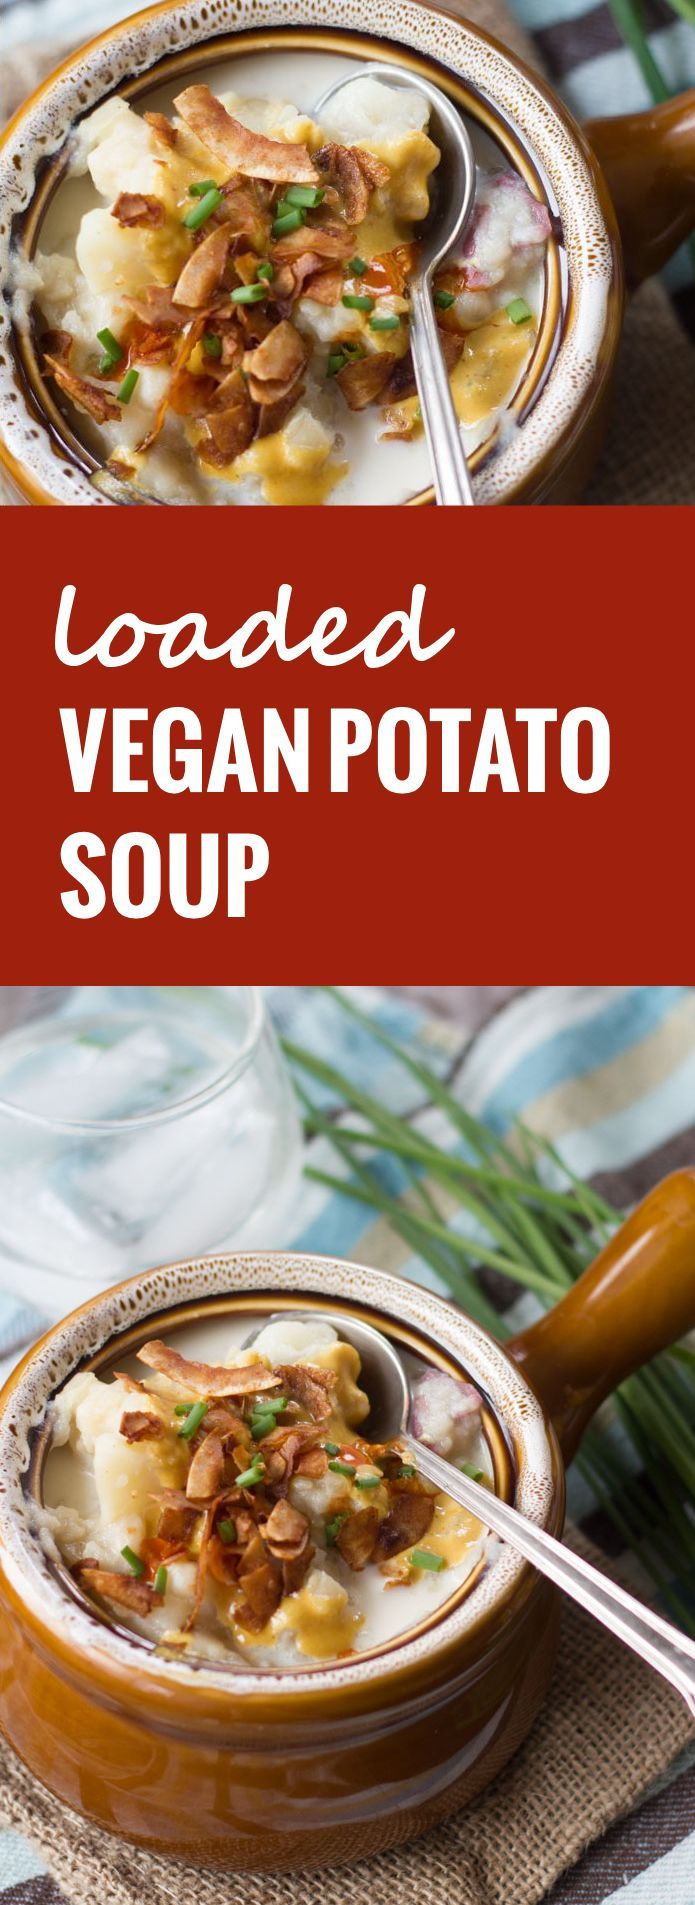 Vegetarian Potato Cheese Soup
 This vegan potato soup is fully loaded with flavor and